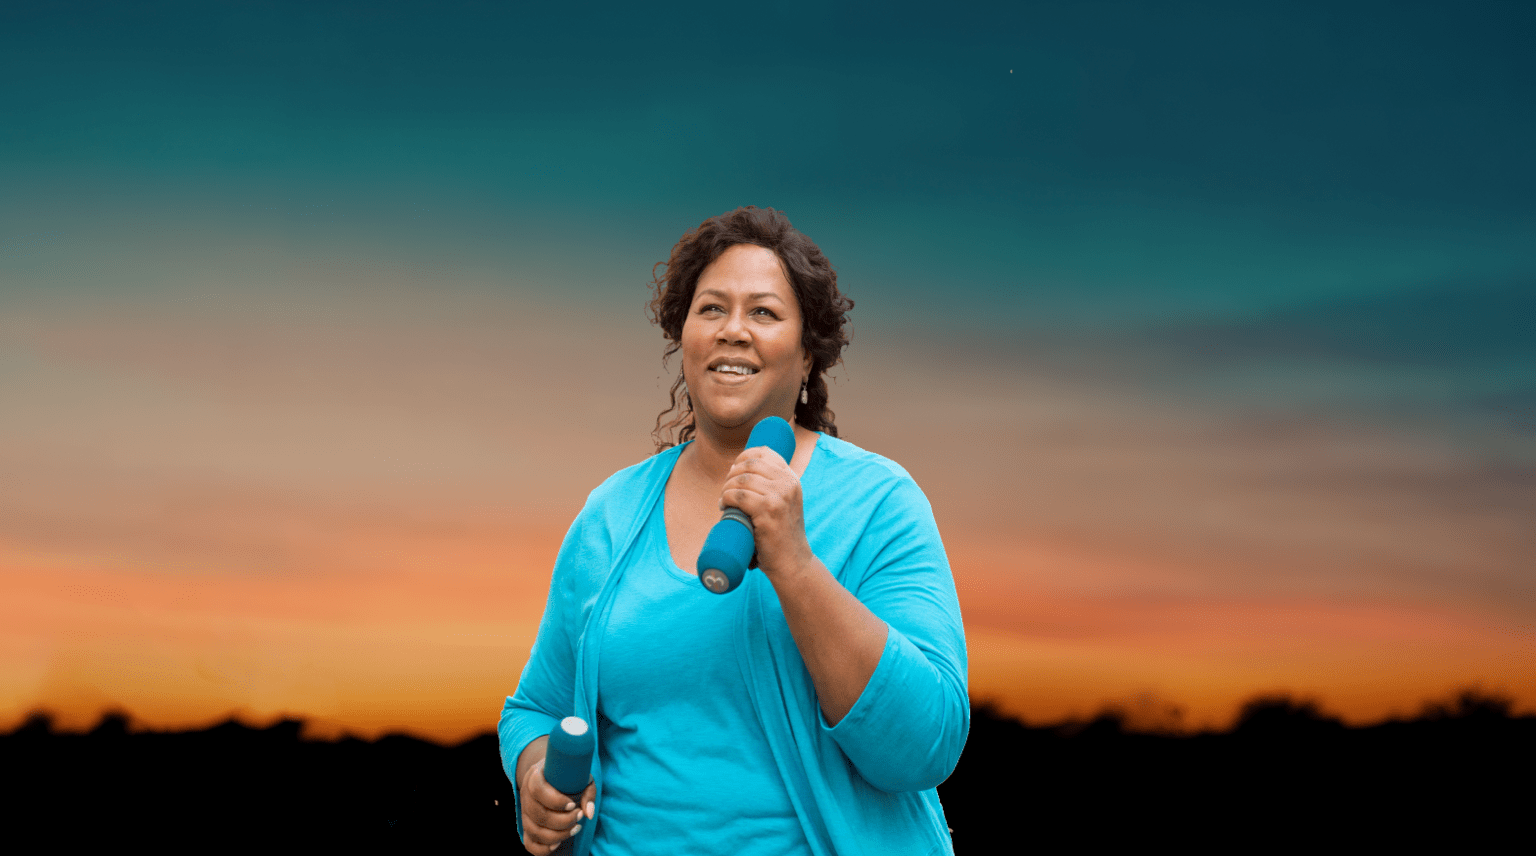 Banner image of a middle-aged woman enthusiastically walking outdoors with a pair of light weights in her hands 